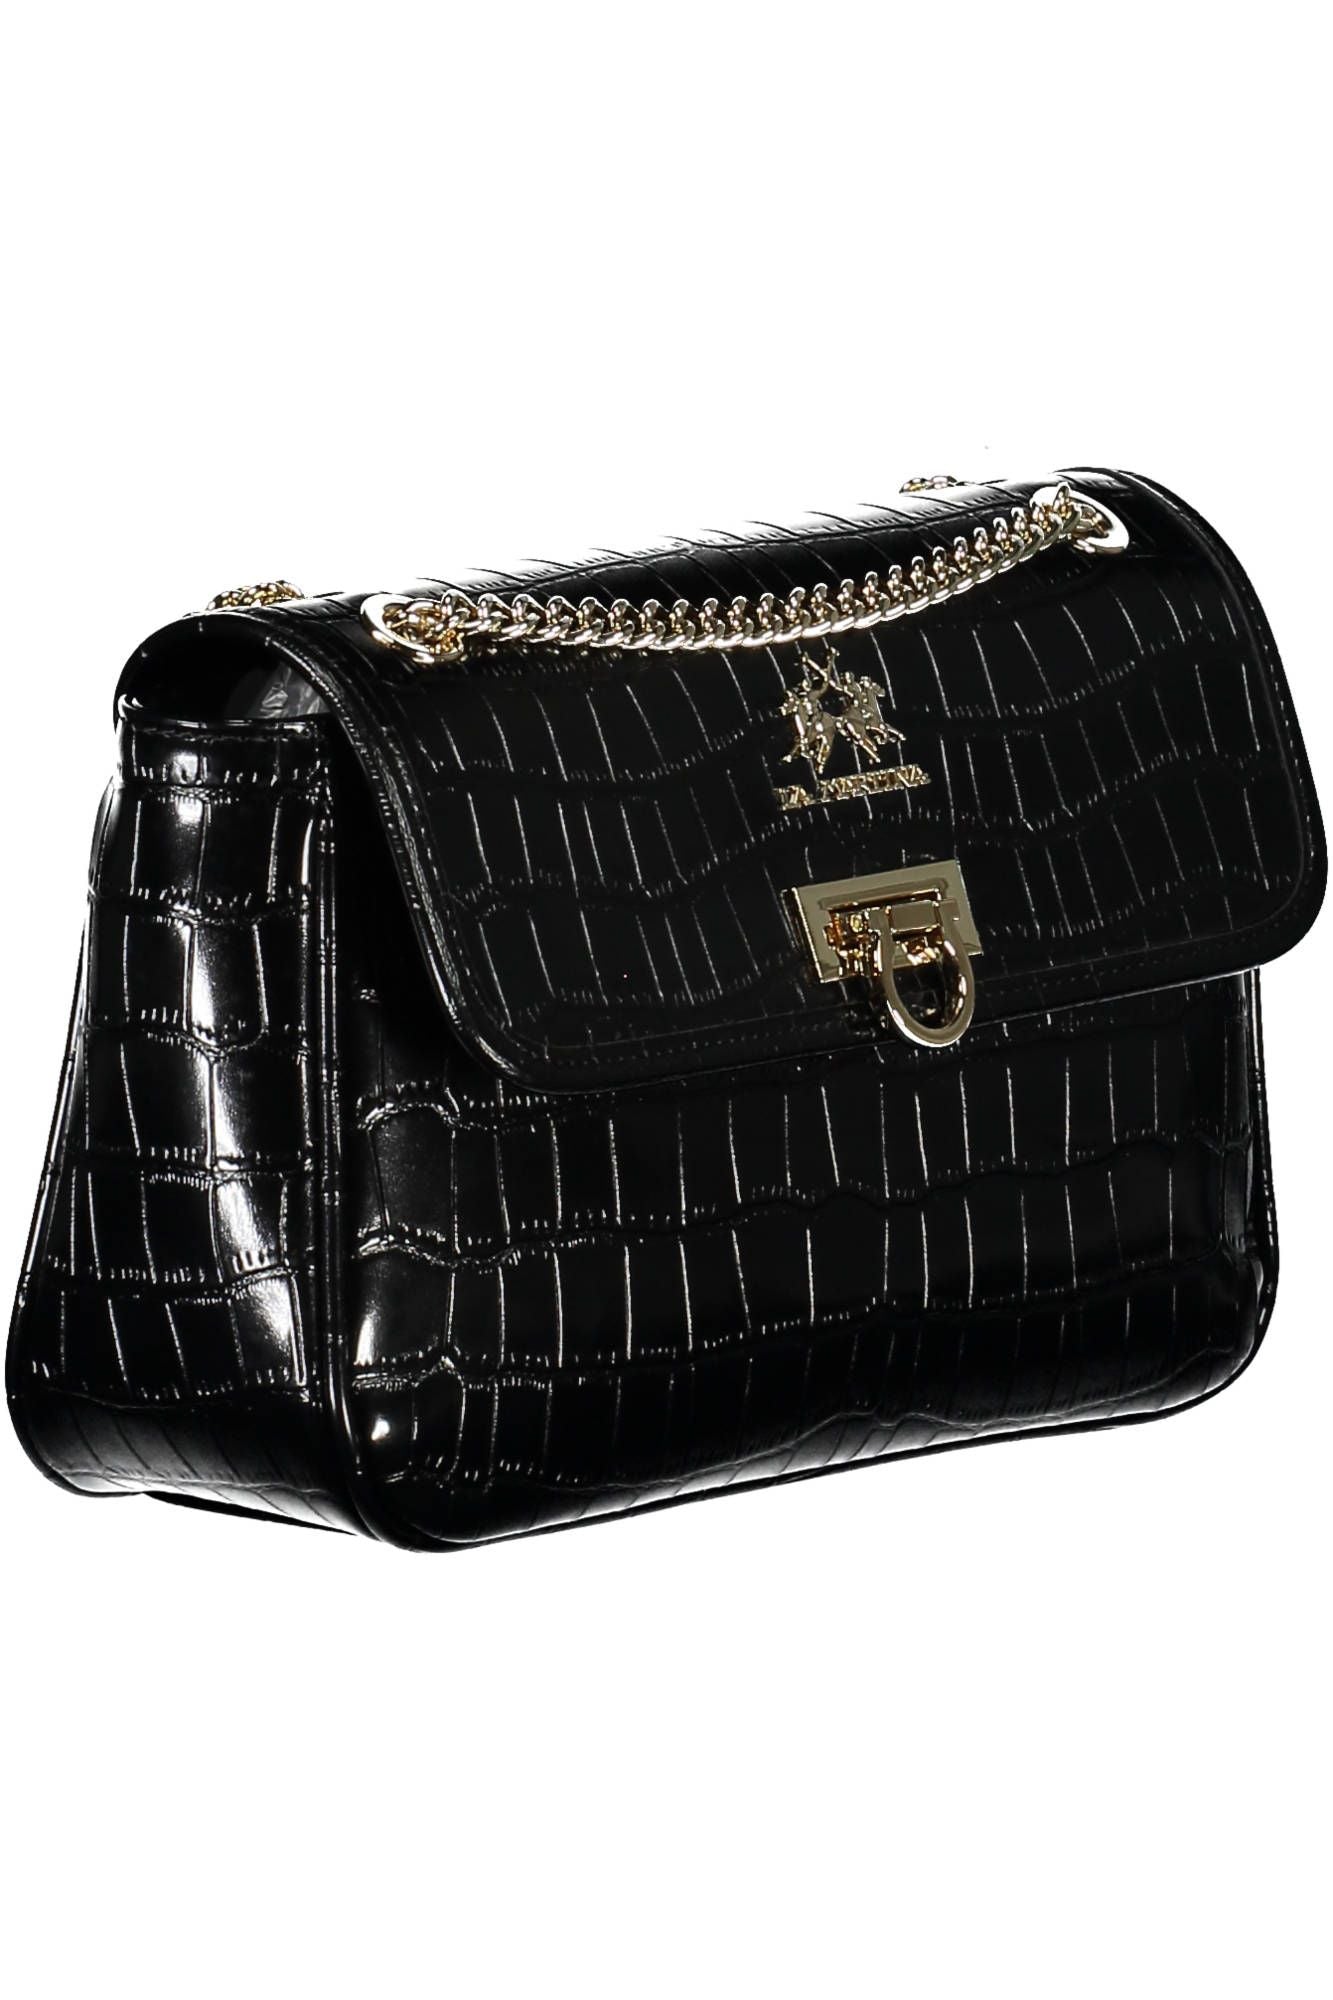 Elegant Chain Shoulder Bag with Contrasting Accents